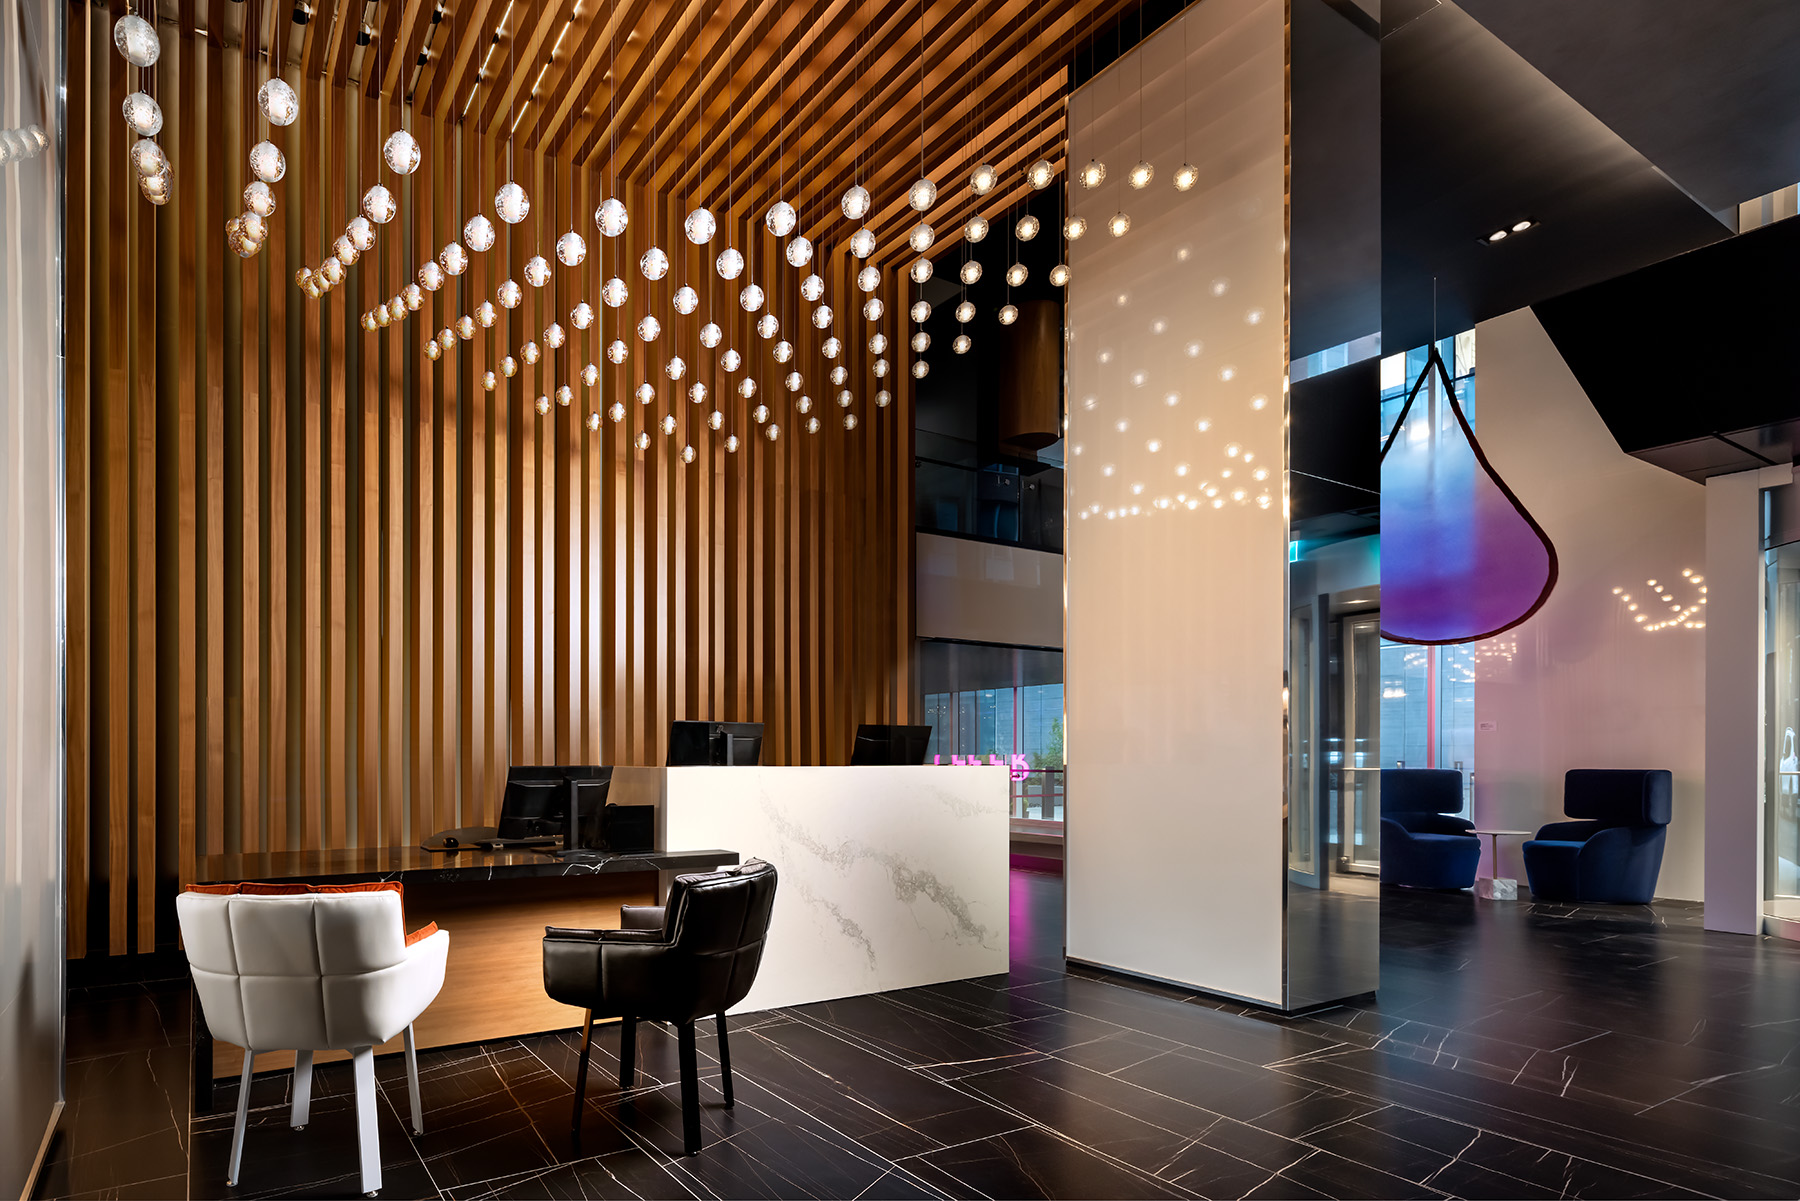 Humaniti Hotel, Montreal, Canada, by Lemay 10